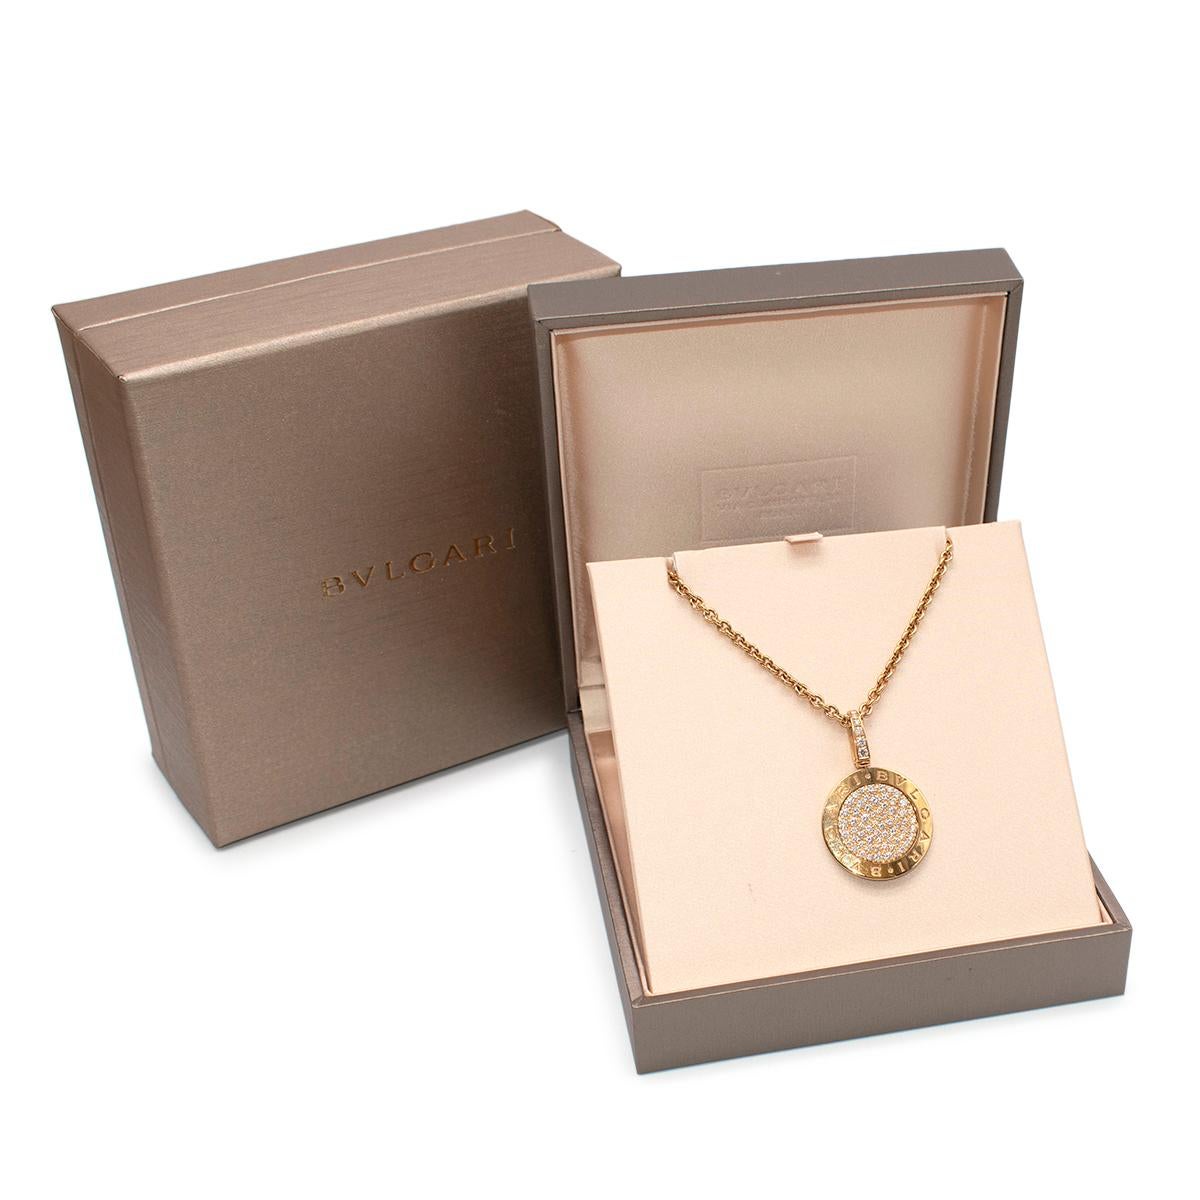 Bvlgari 18kt Rose Gold Pave Diamonds Bvlgari-Bvlgari Necklace

- 18 kt rose gold pendant set with onyx and pave diamonds
- The trademark double logo


Materials:
18 kt rose gold